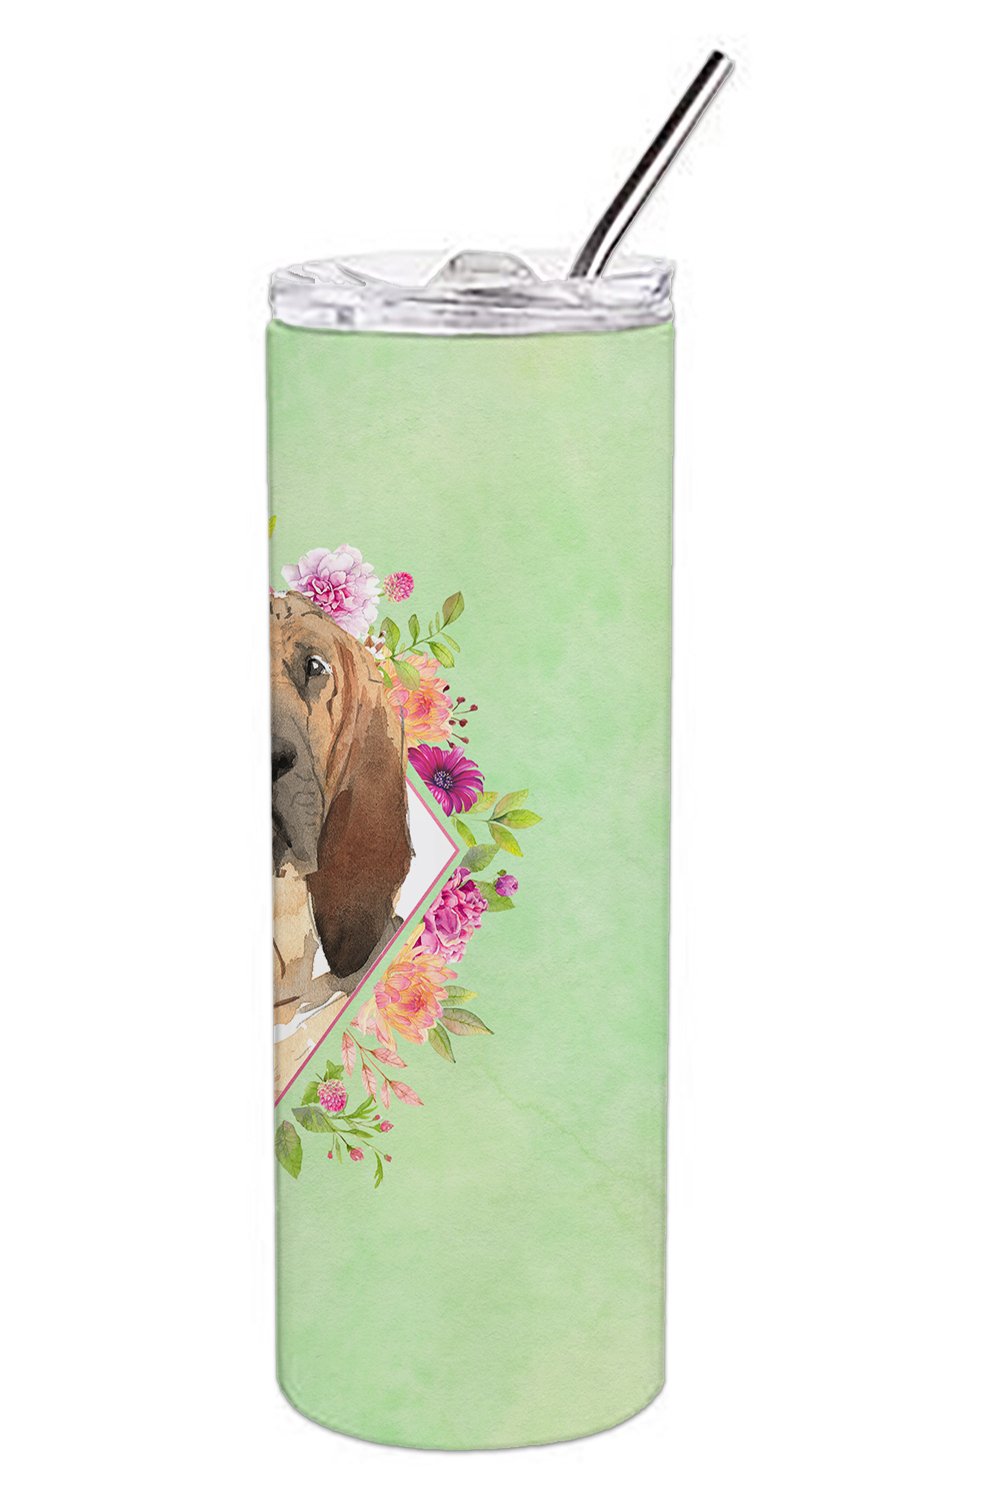 Bloodhound Green Flowers Double Walled Stainless Steel 20 oz Skinny Tumbler CK4419TBL20 by Caroline's Treasures